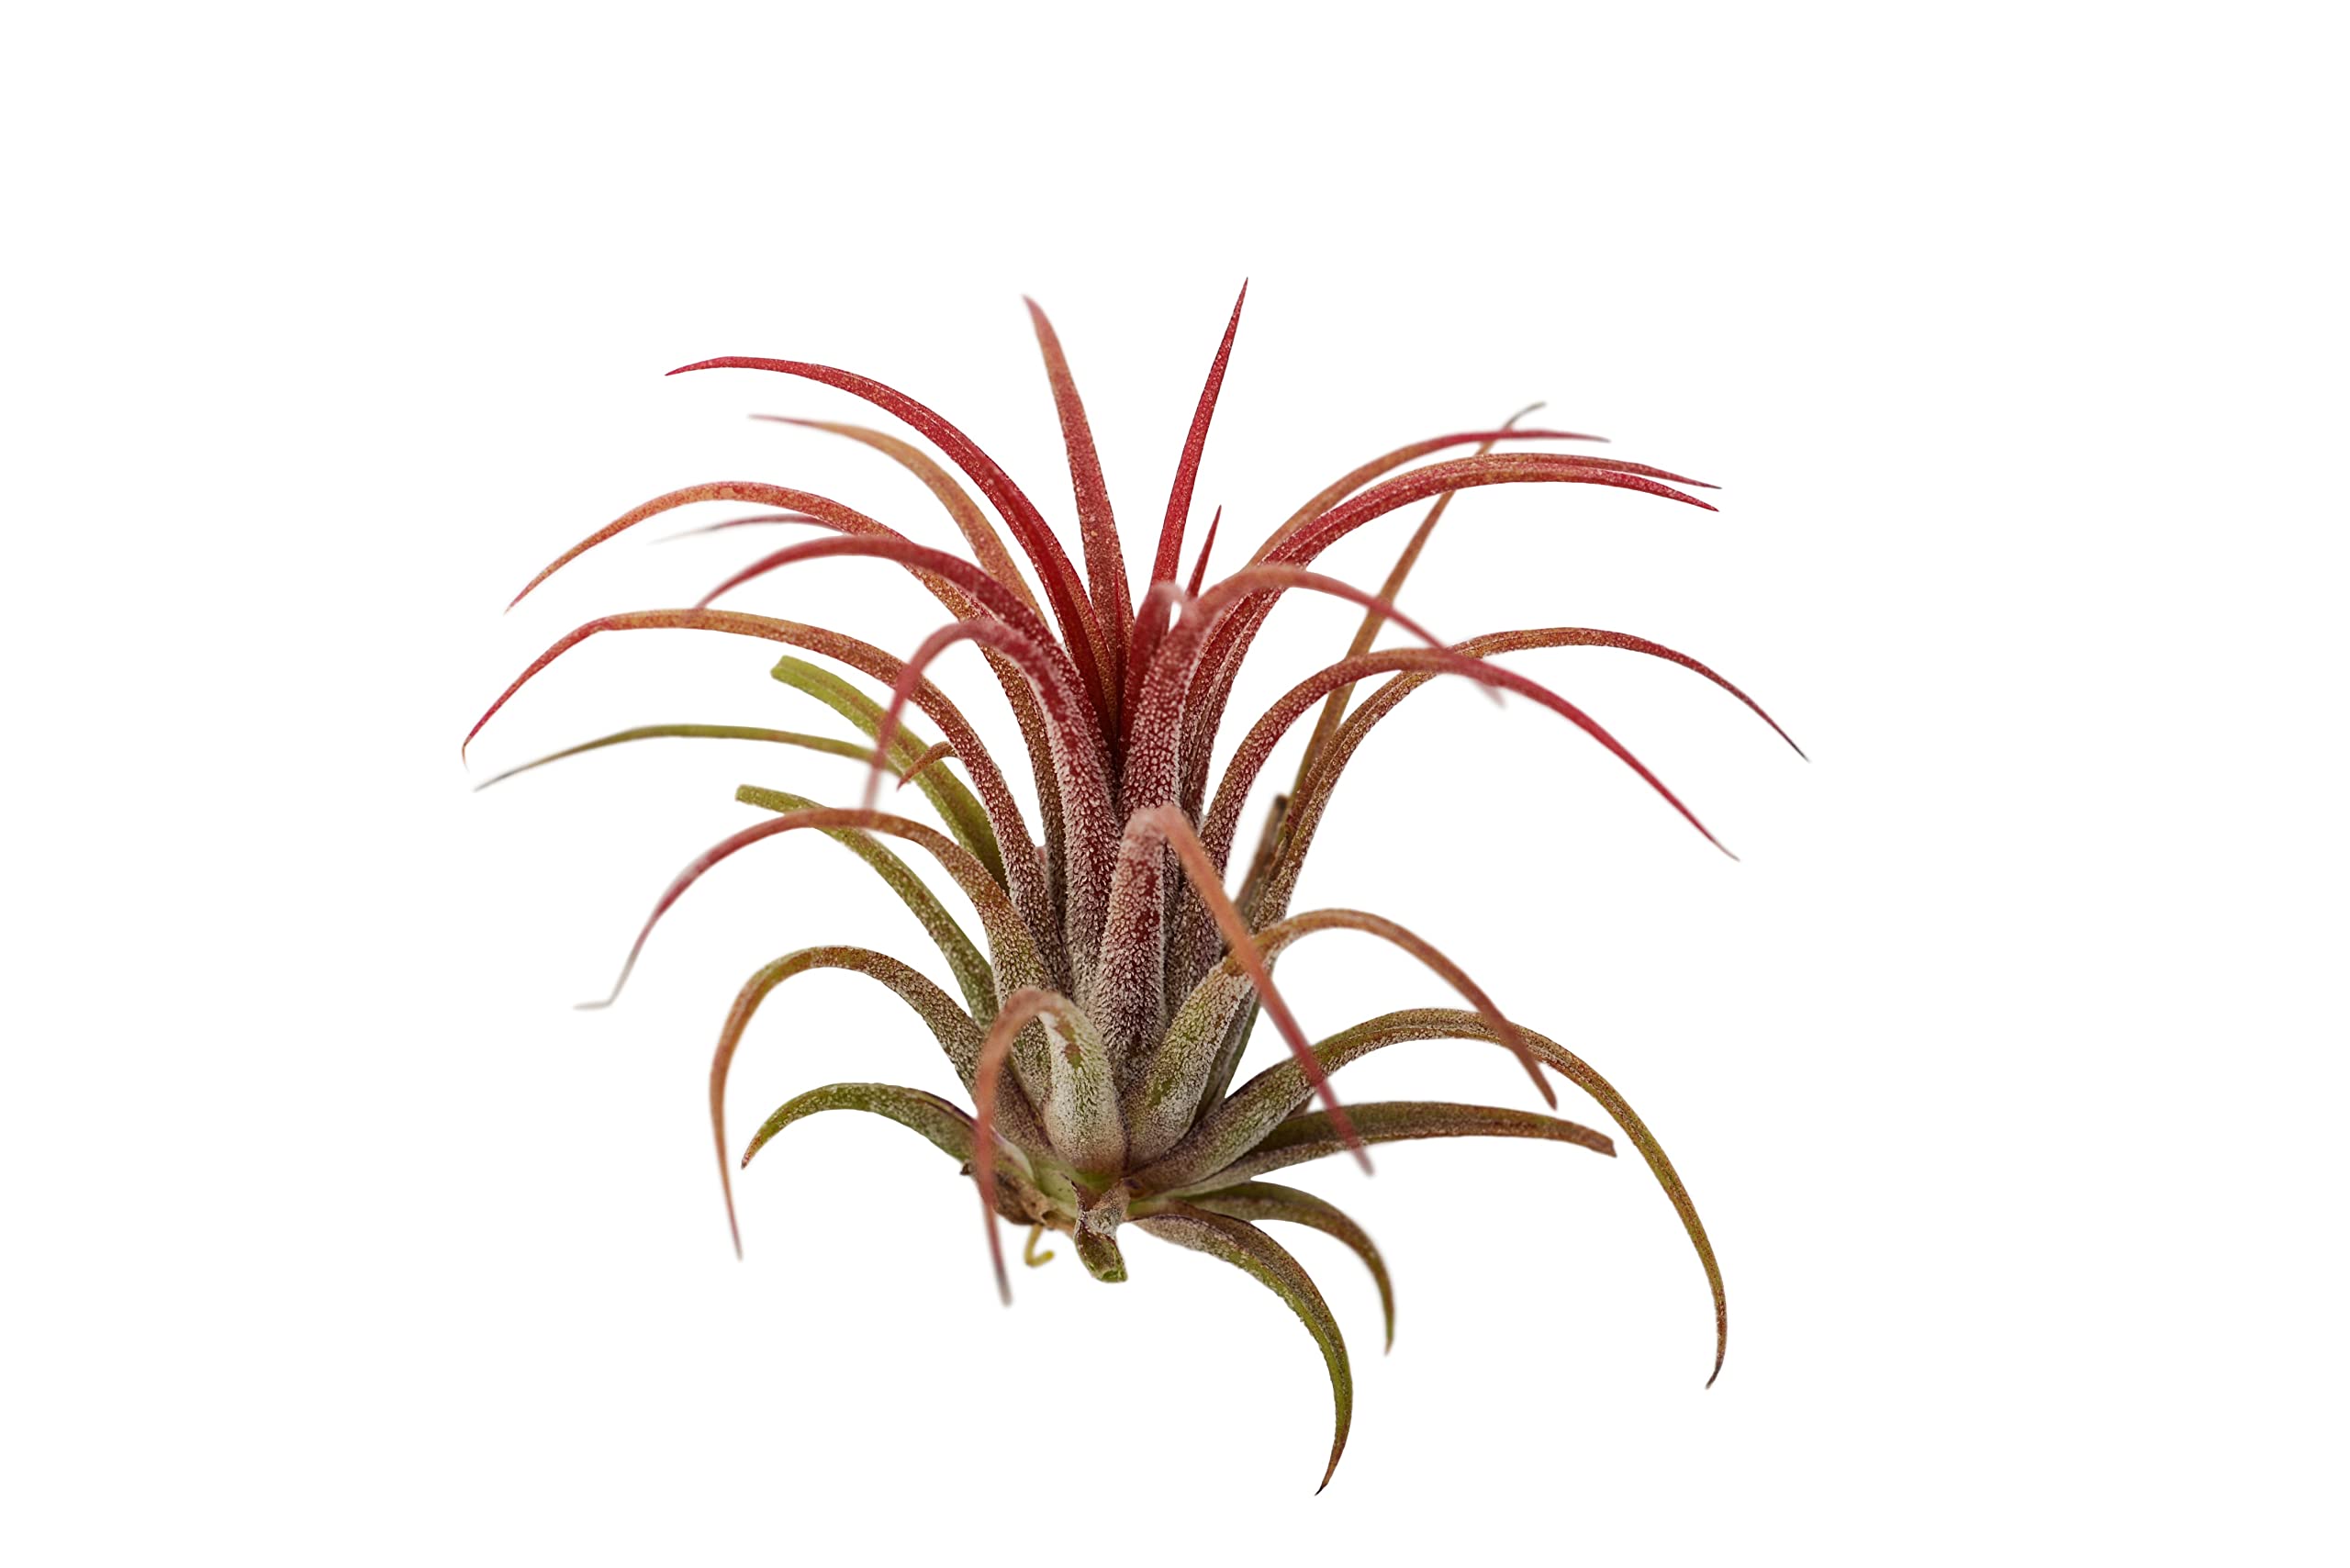 It Blooms Rainforest Grown One RED Ionantha Fuego Air Plants - Live Tillandsia - 1.5 to 3 inches - 30 Day Guarantee